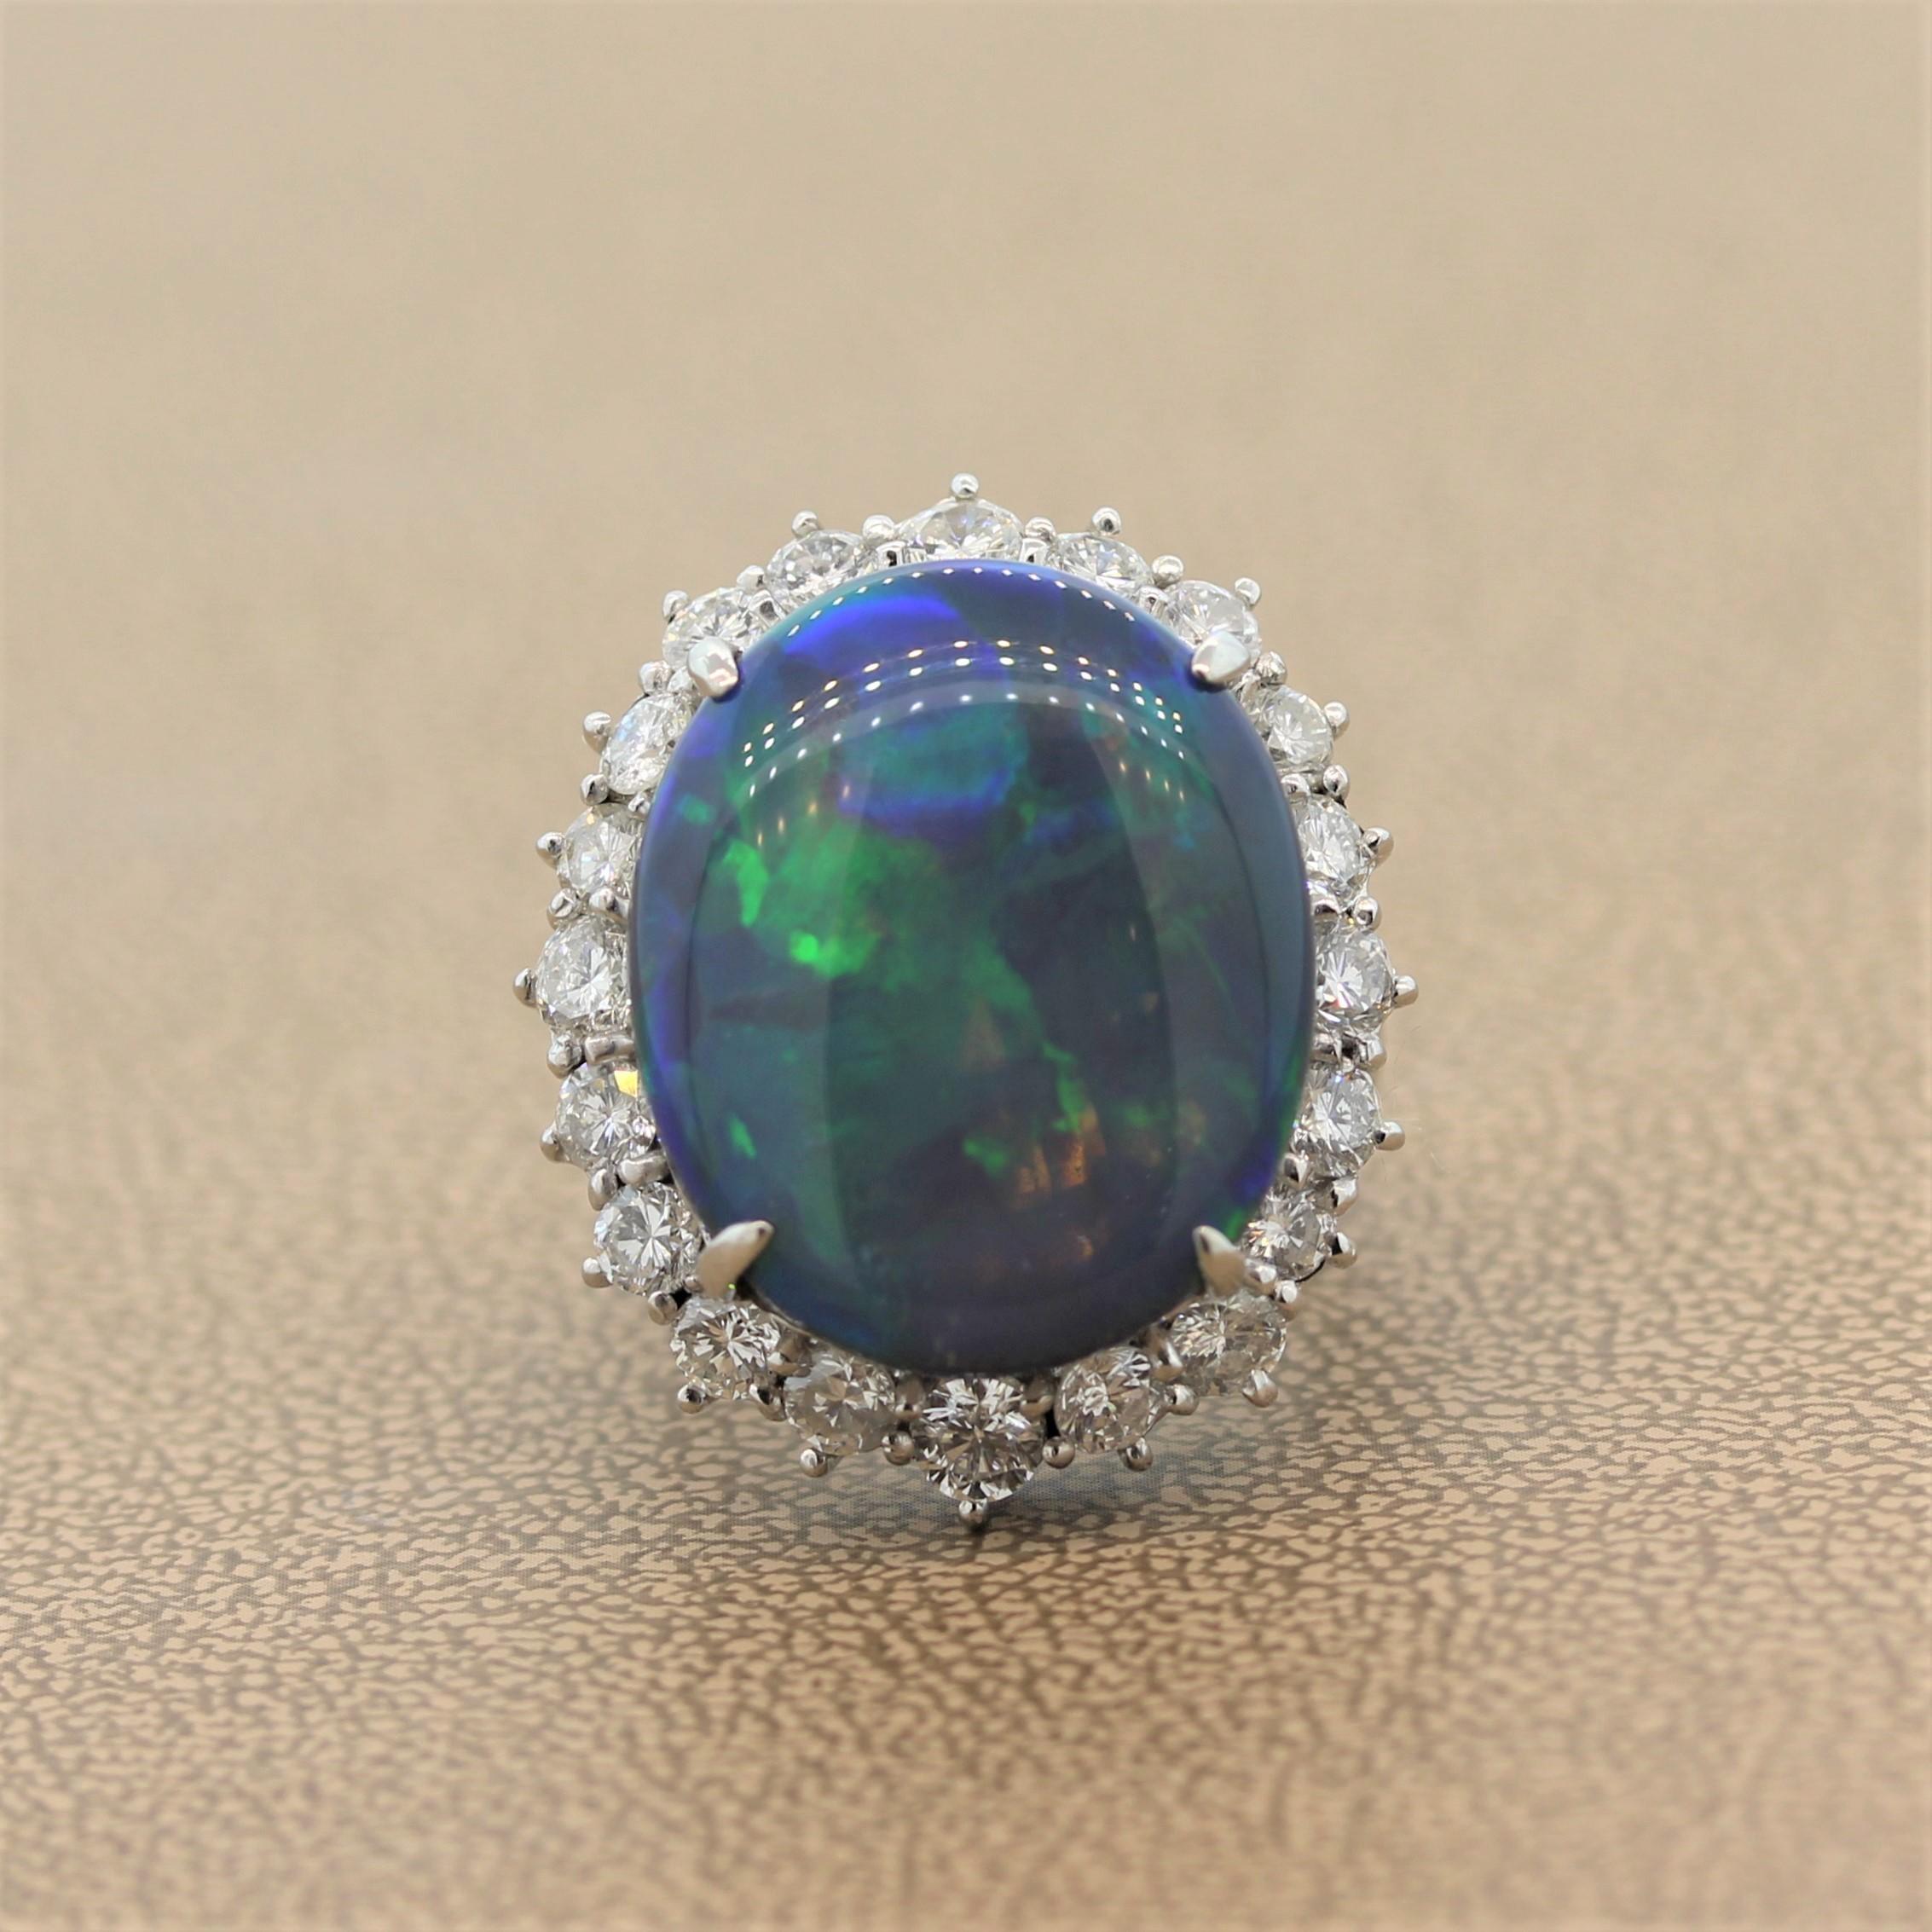 Make a statement with this astounding cocktail ring featuring a 19.86 carat Australian opal showing strong play of color with flashes or blue green and other colors. The oval shaped opal is haloed by 2.46 carats of round cut diamonds in a platinum